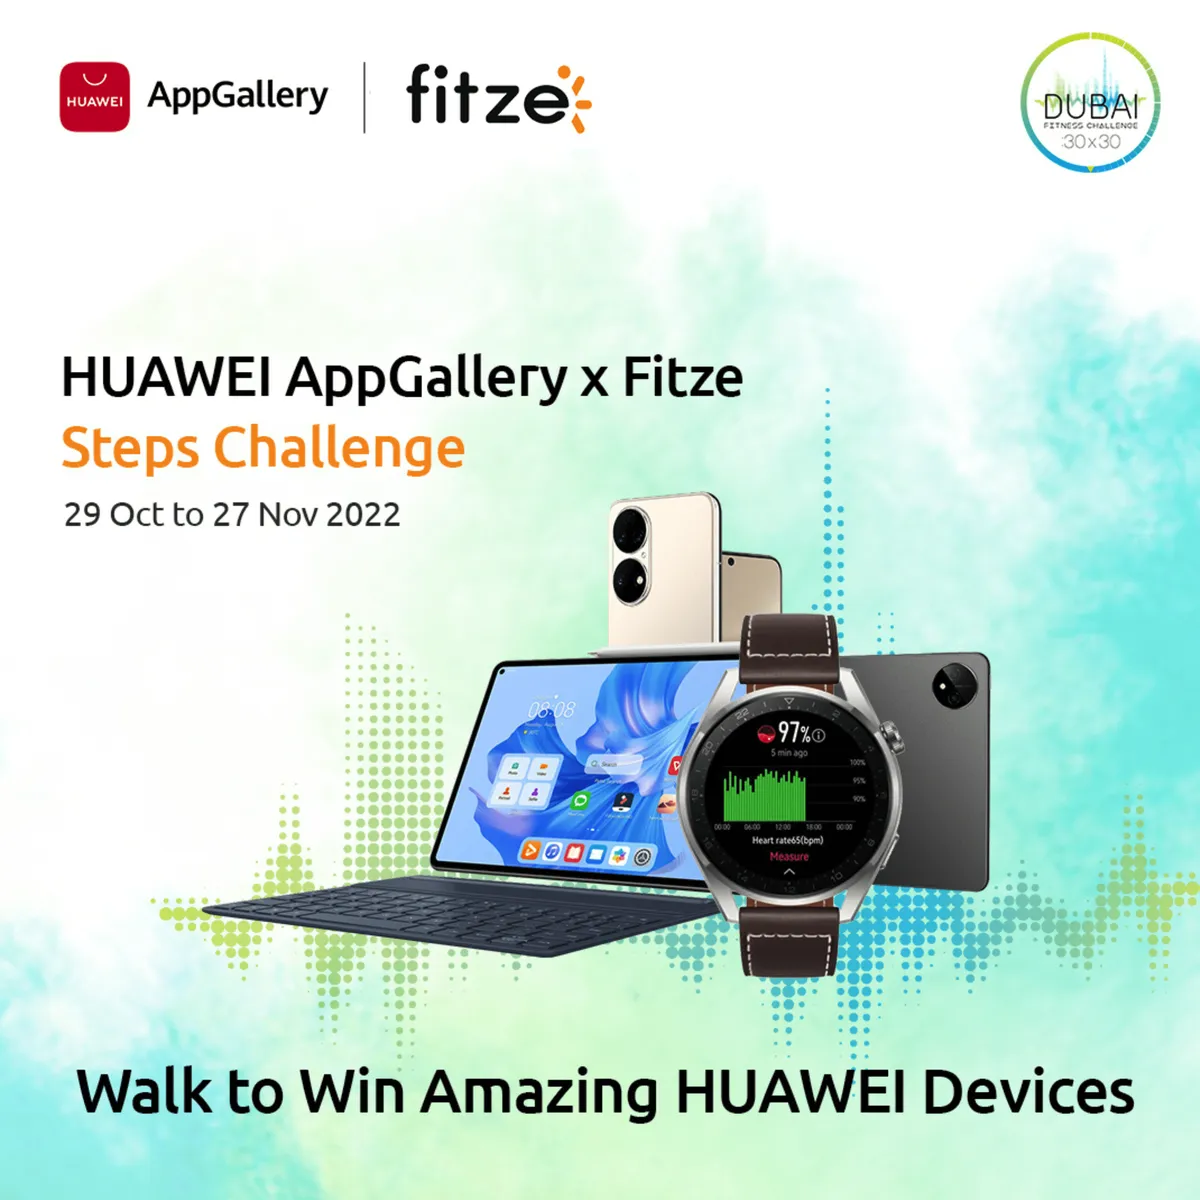 HUAWEI AppGallery collaborates with Fitze UAE to reward every step